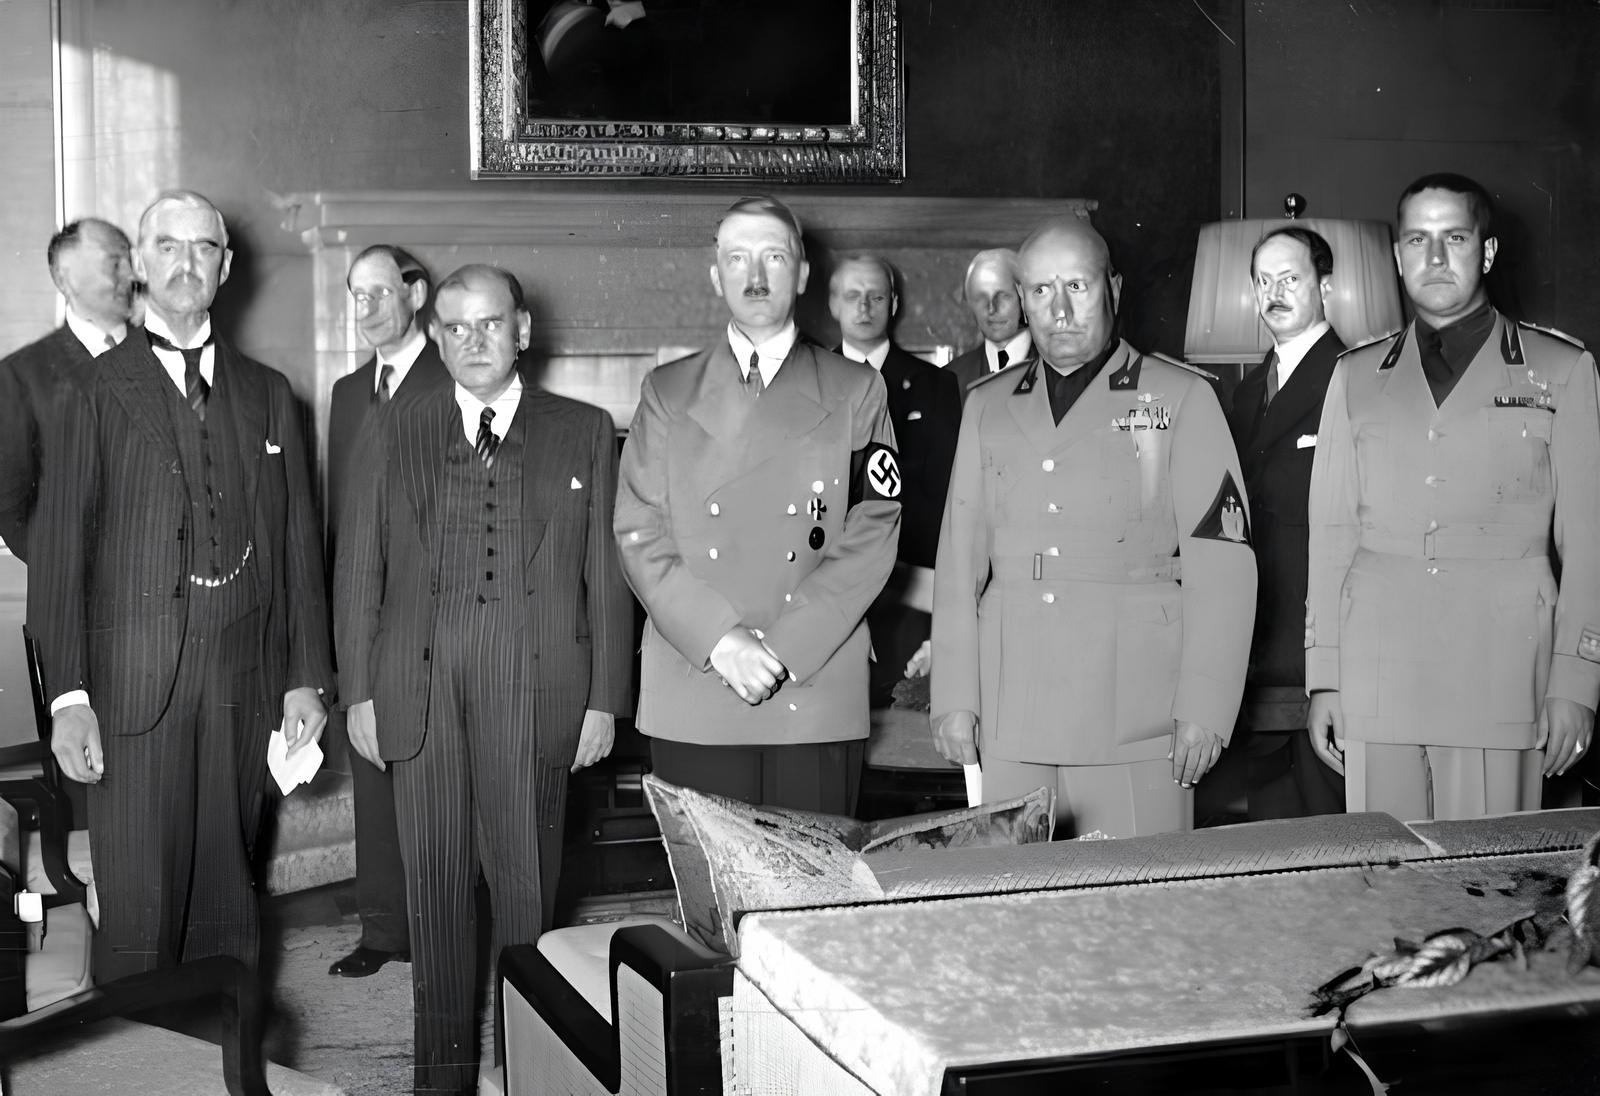 Chamberlain, Daladier, Hitler, Mussolini, and Ciano pictured before signing the Munich Agreement.